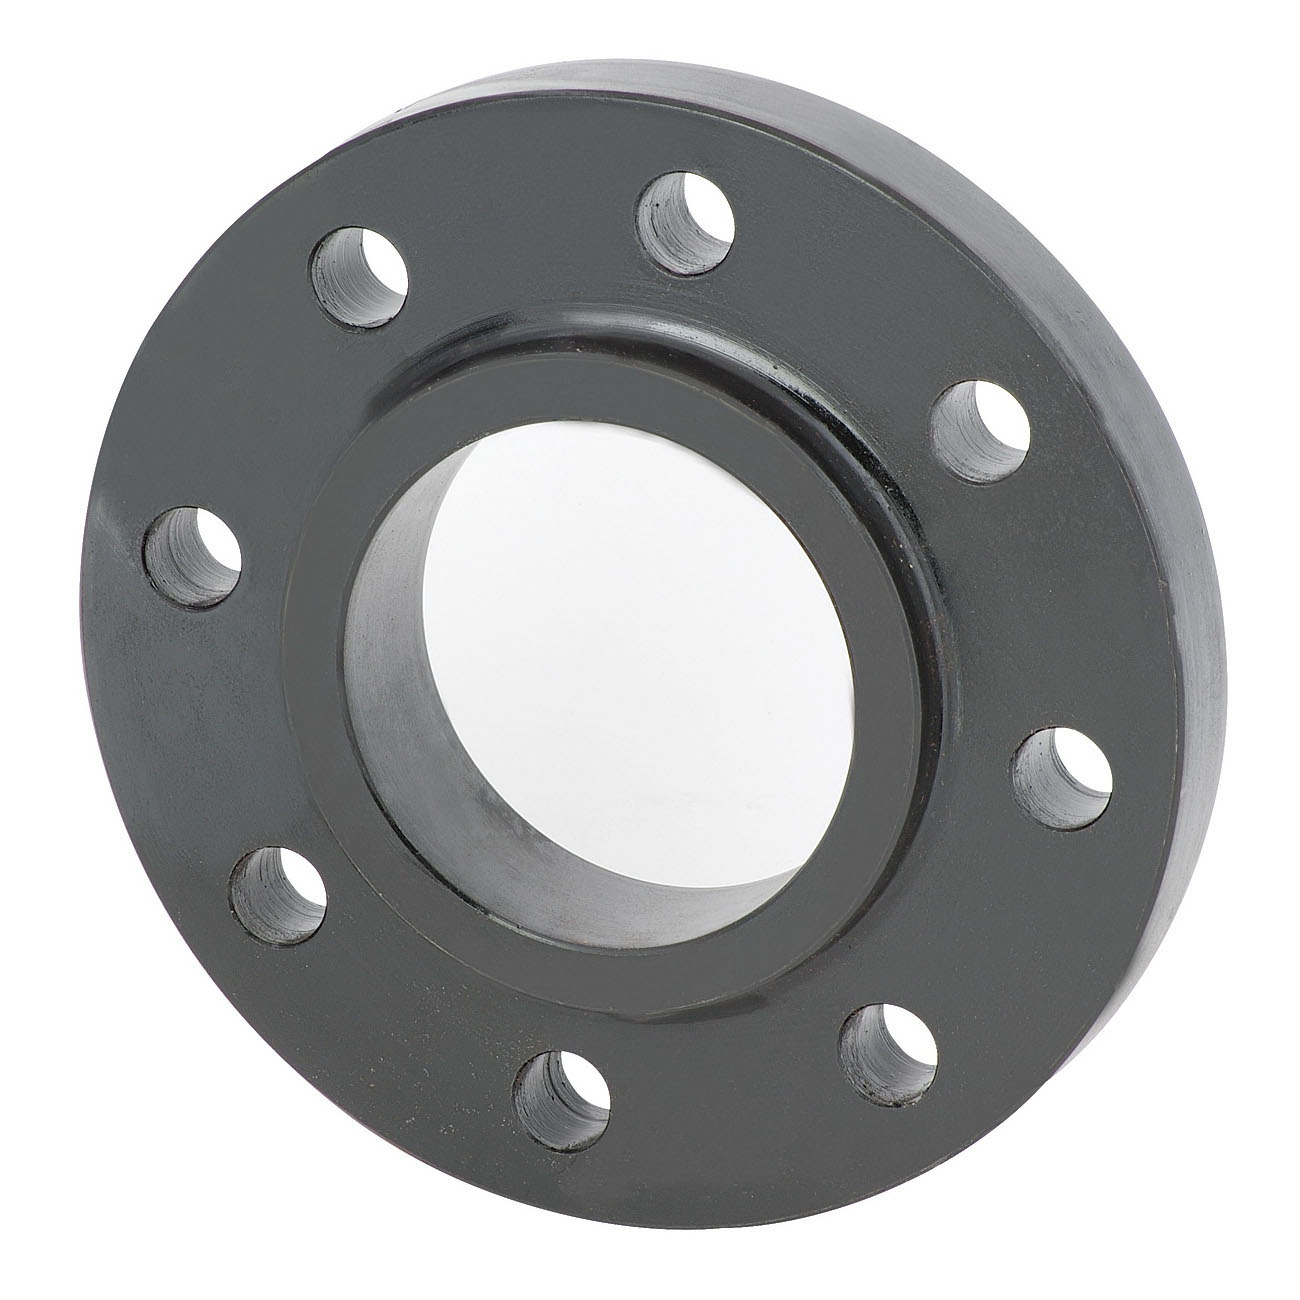 Matco-Norca&trade; MN300SF08 Raised Face Slip-On Flange, 2 in, Carbon Steel, 300 lb